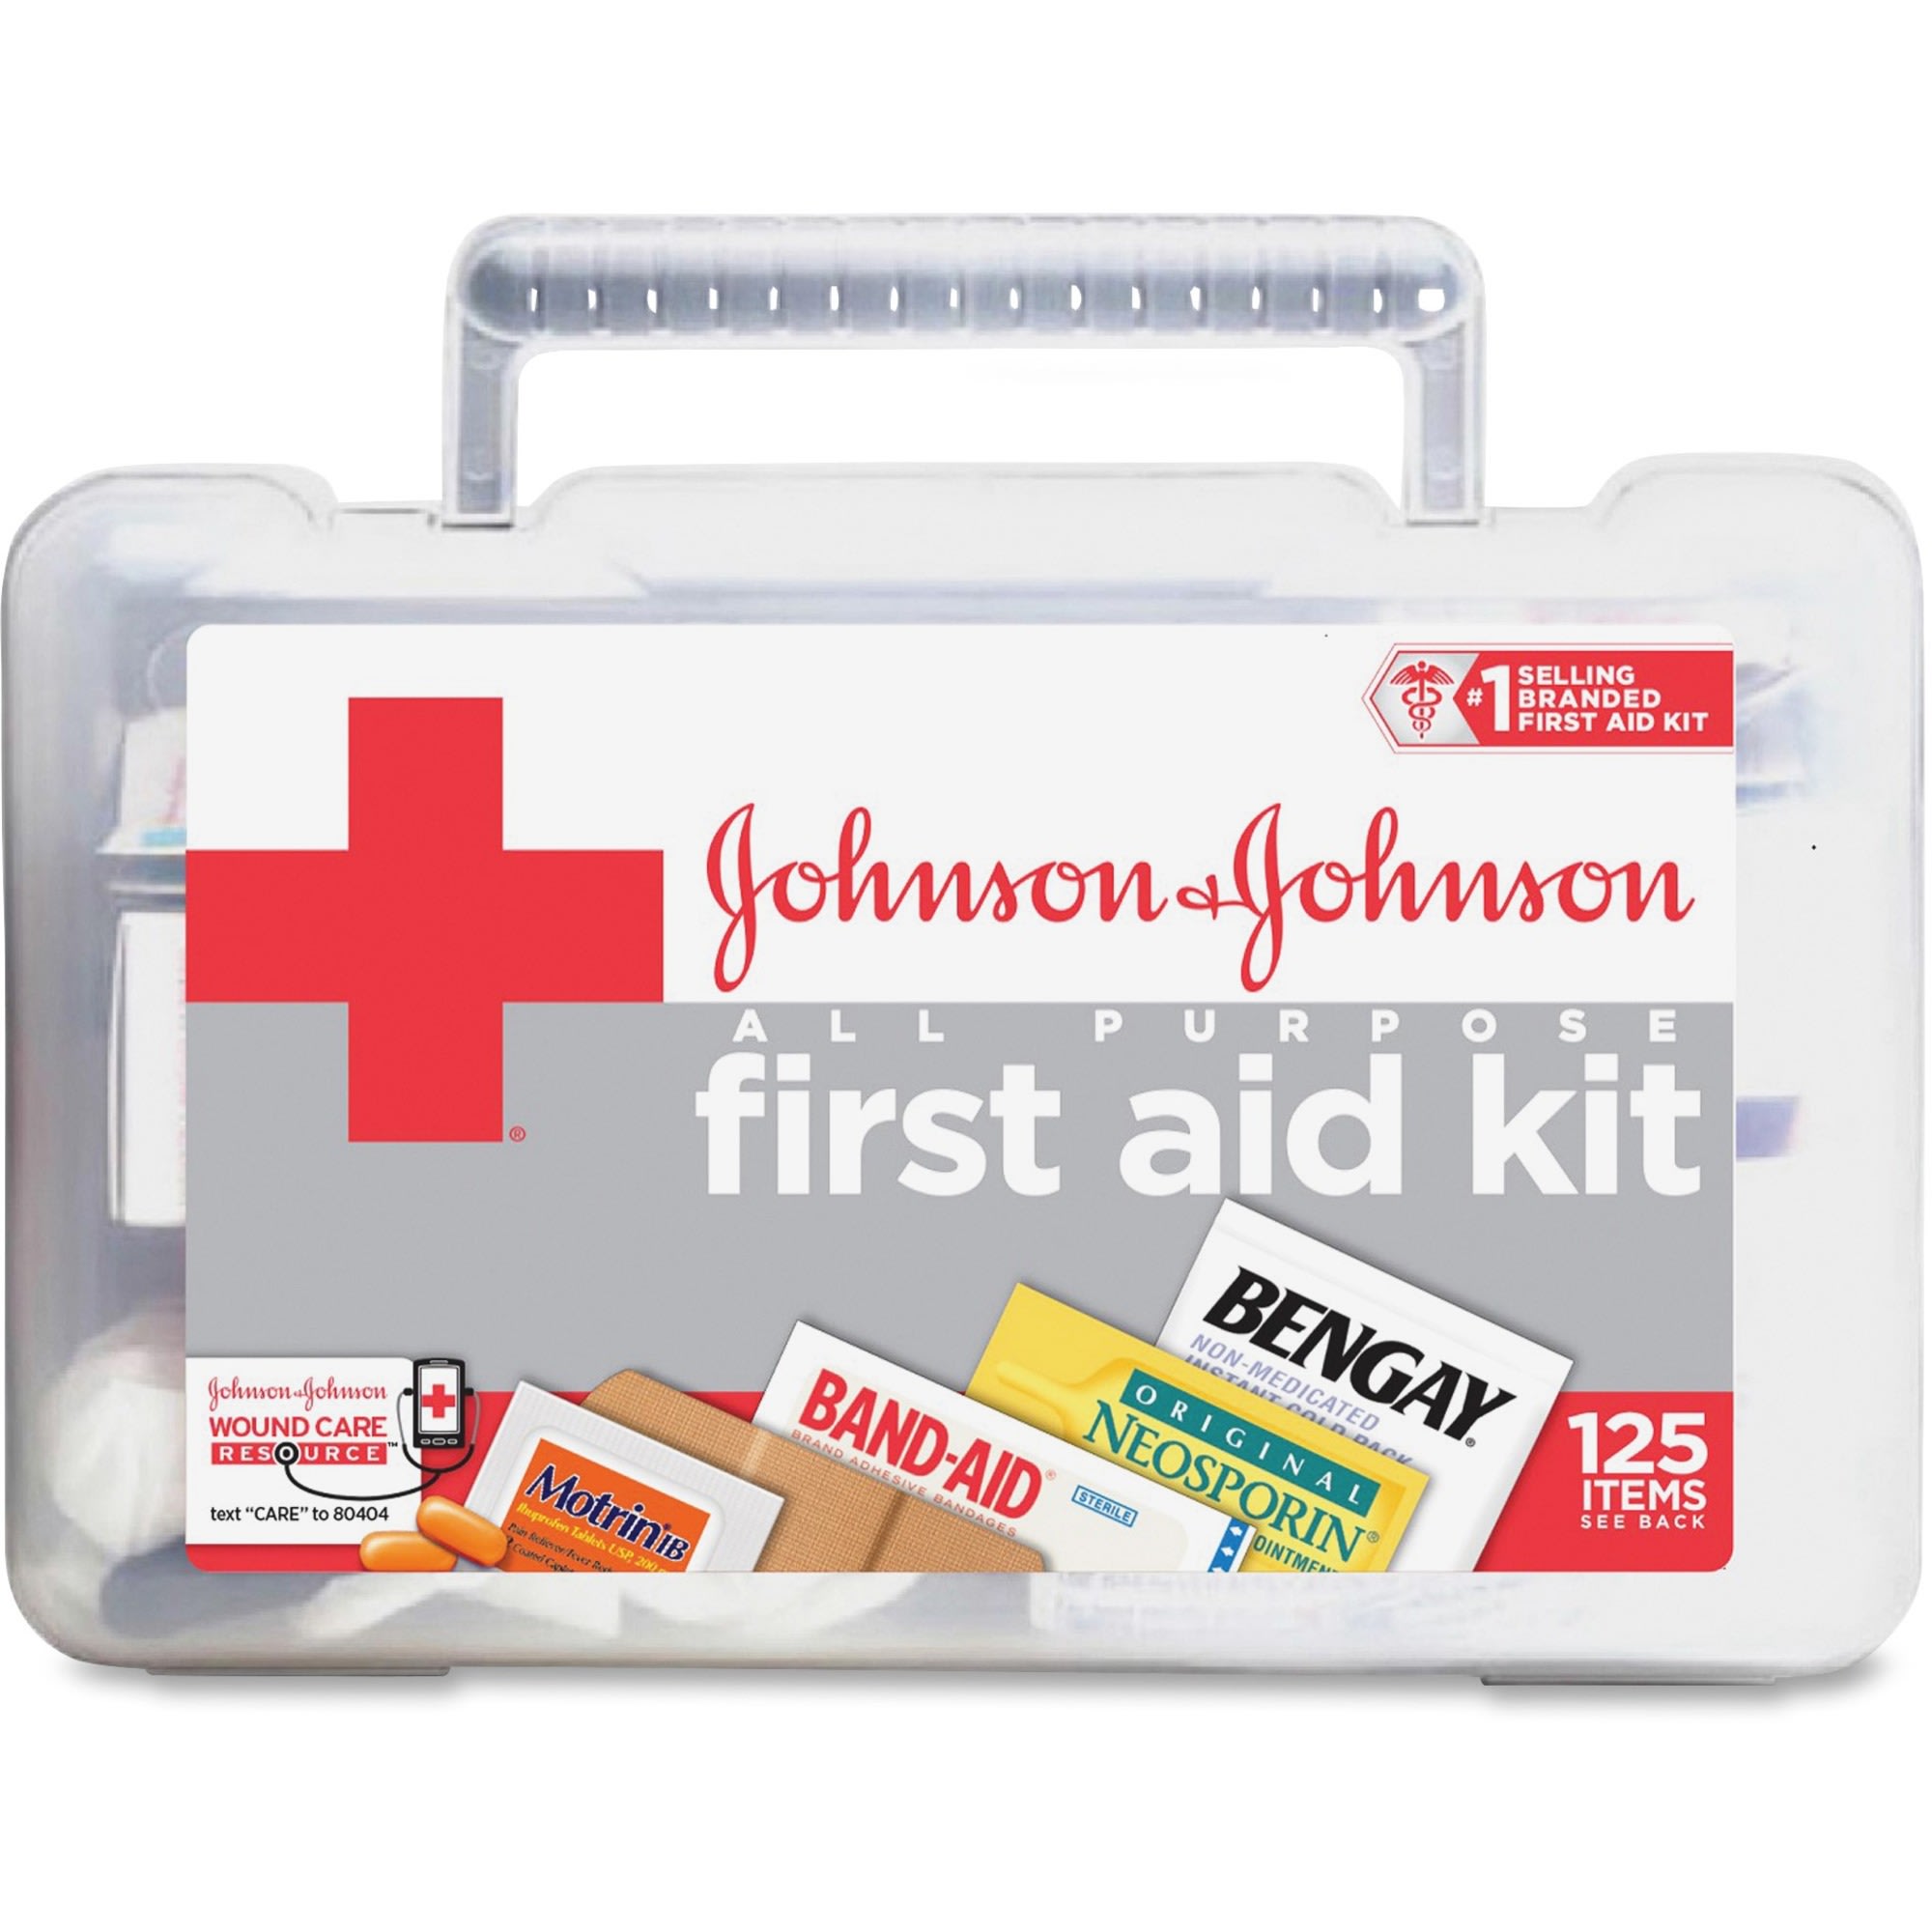 All Purpose 125-item First Aid Kit - image 1 of 3